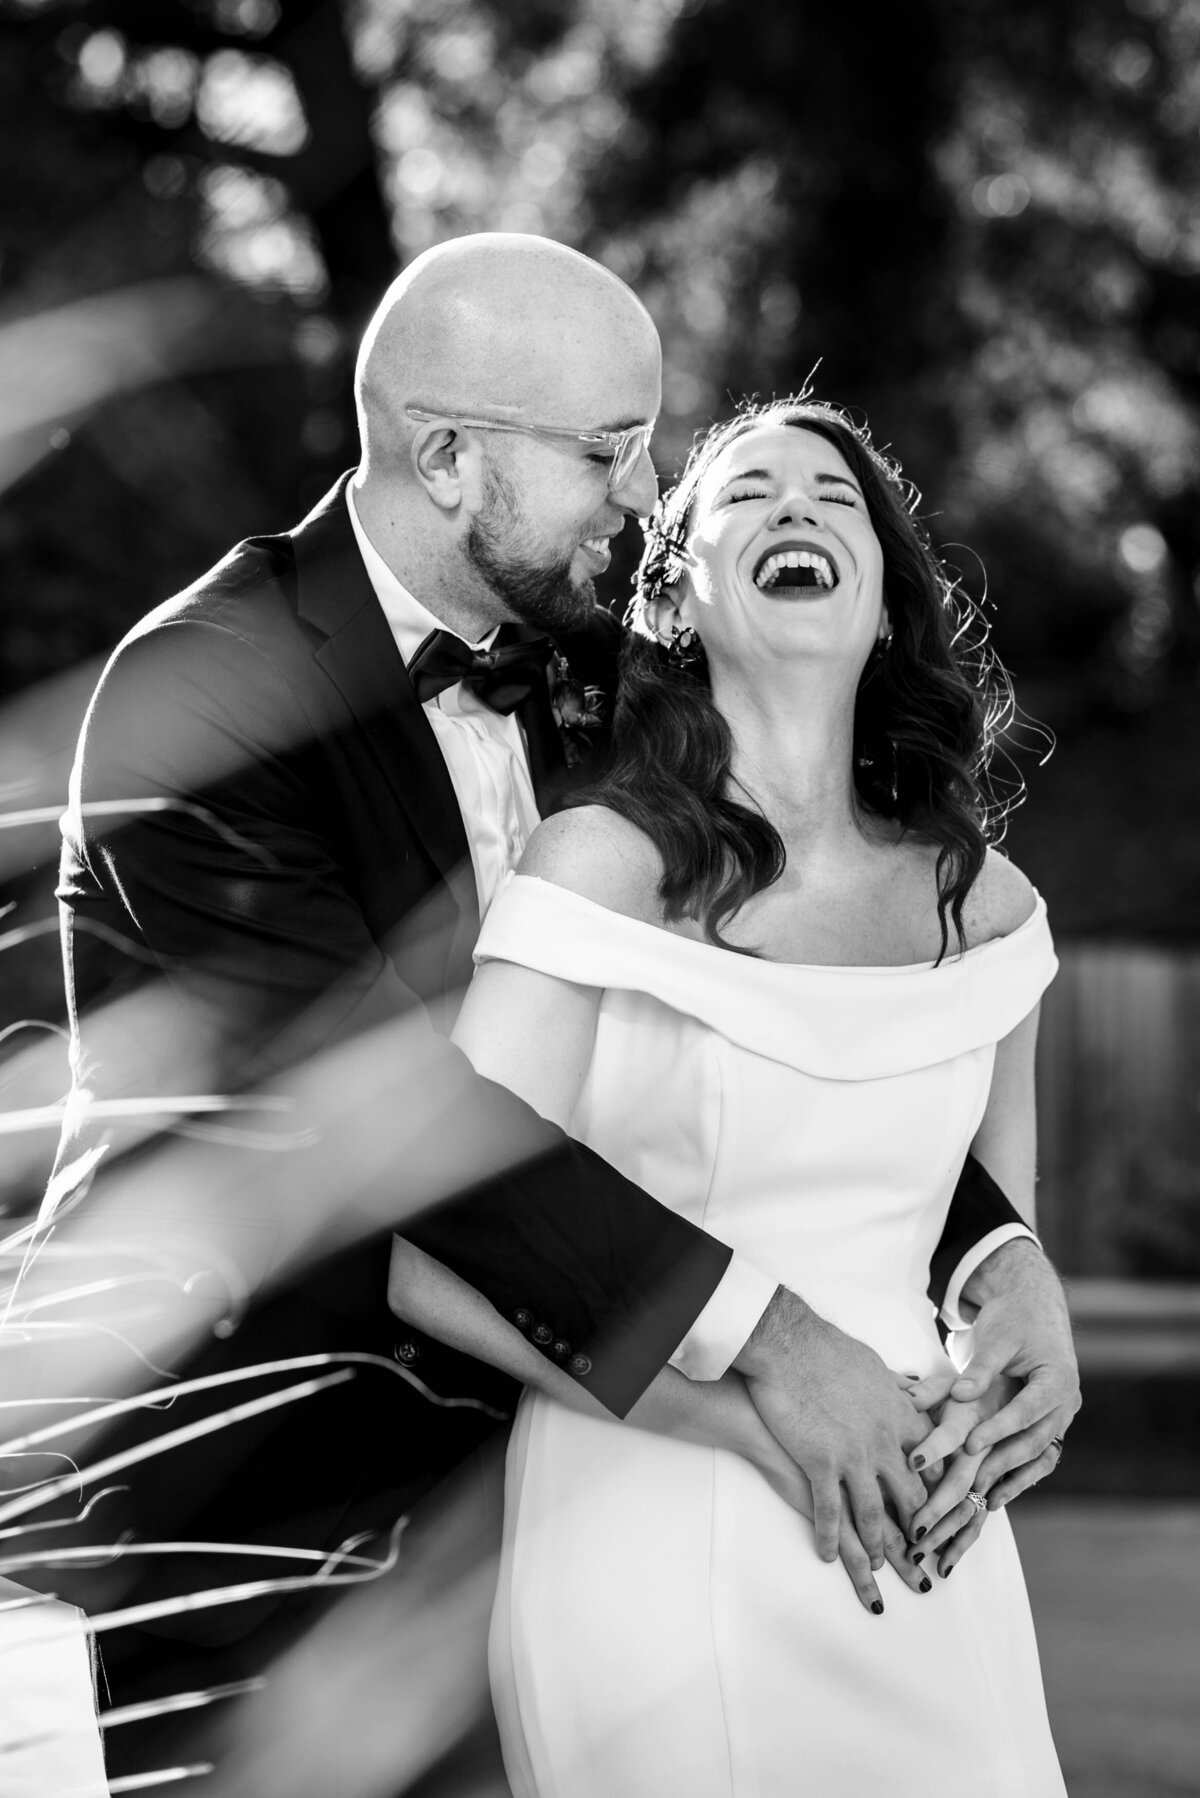 Black and white photograph of grooms arms around his bride from behind smiling at her as she leans her head back laughing by Charlotte wedding photographers DeLong Photography